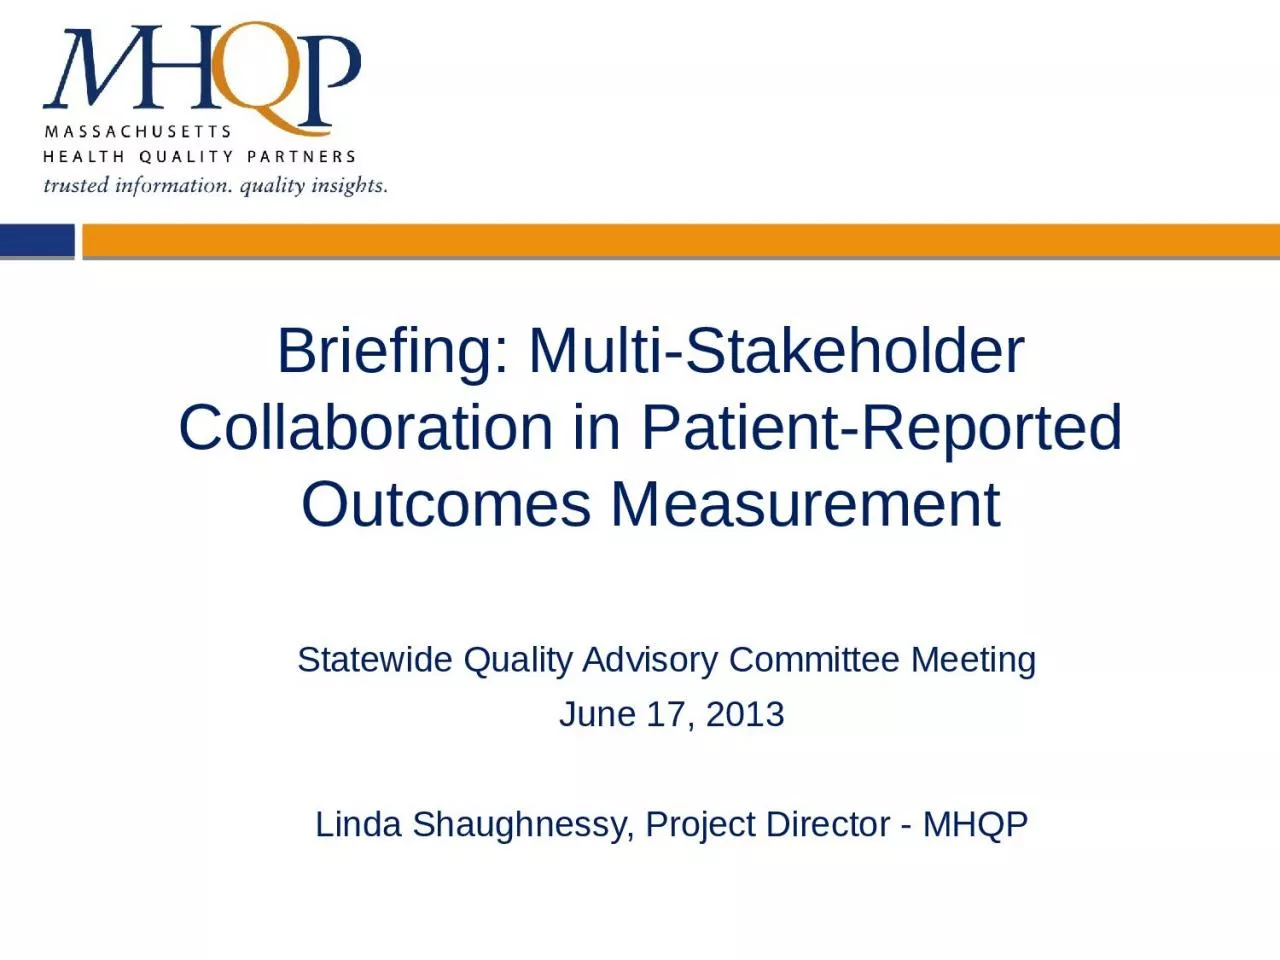 Briefing: Multi-Stakeholder Collaboration in Patient-Reported Outcomes Measurement